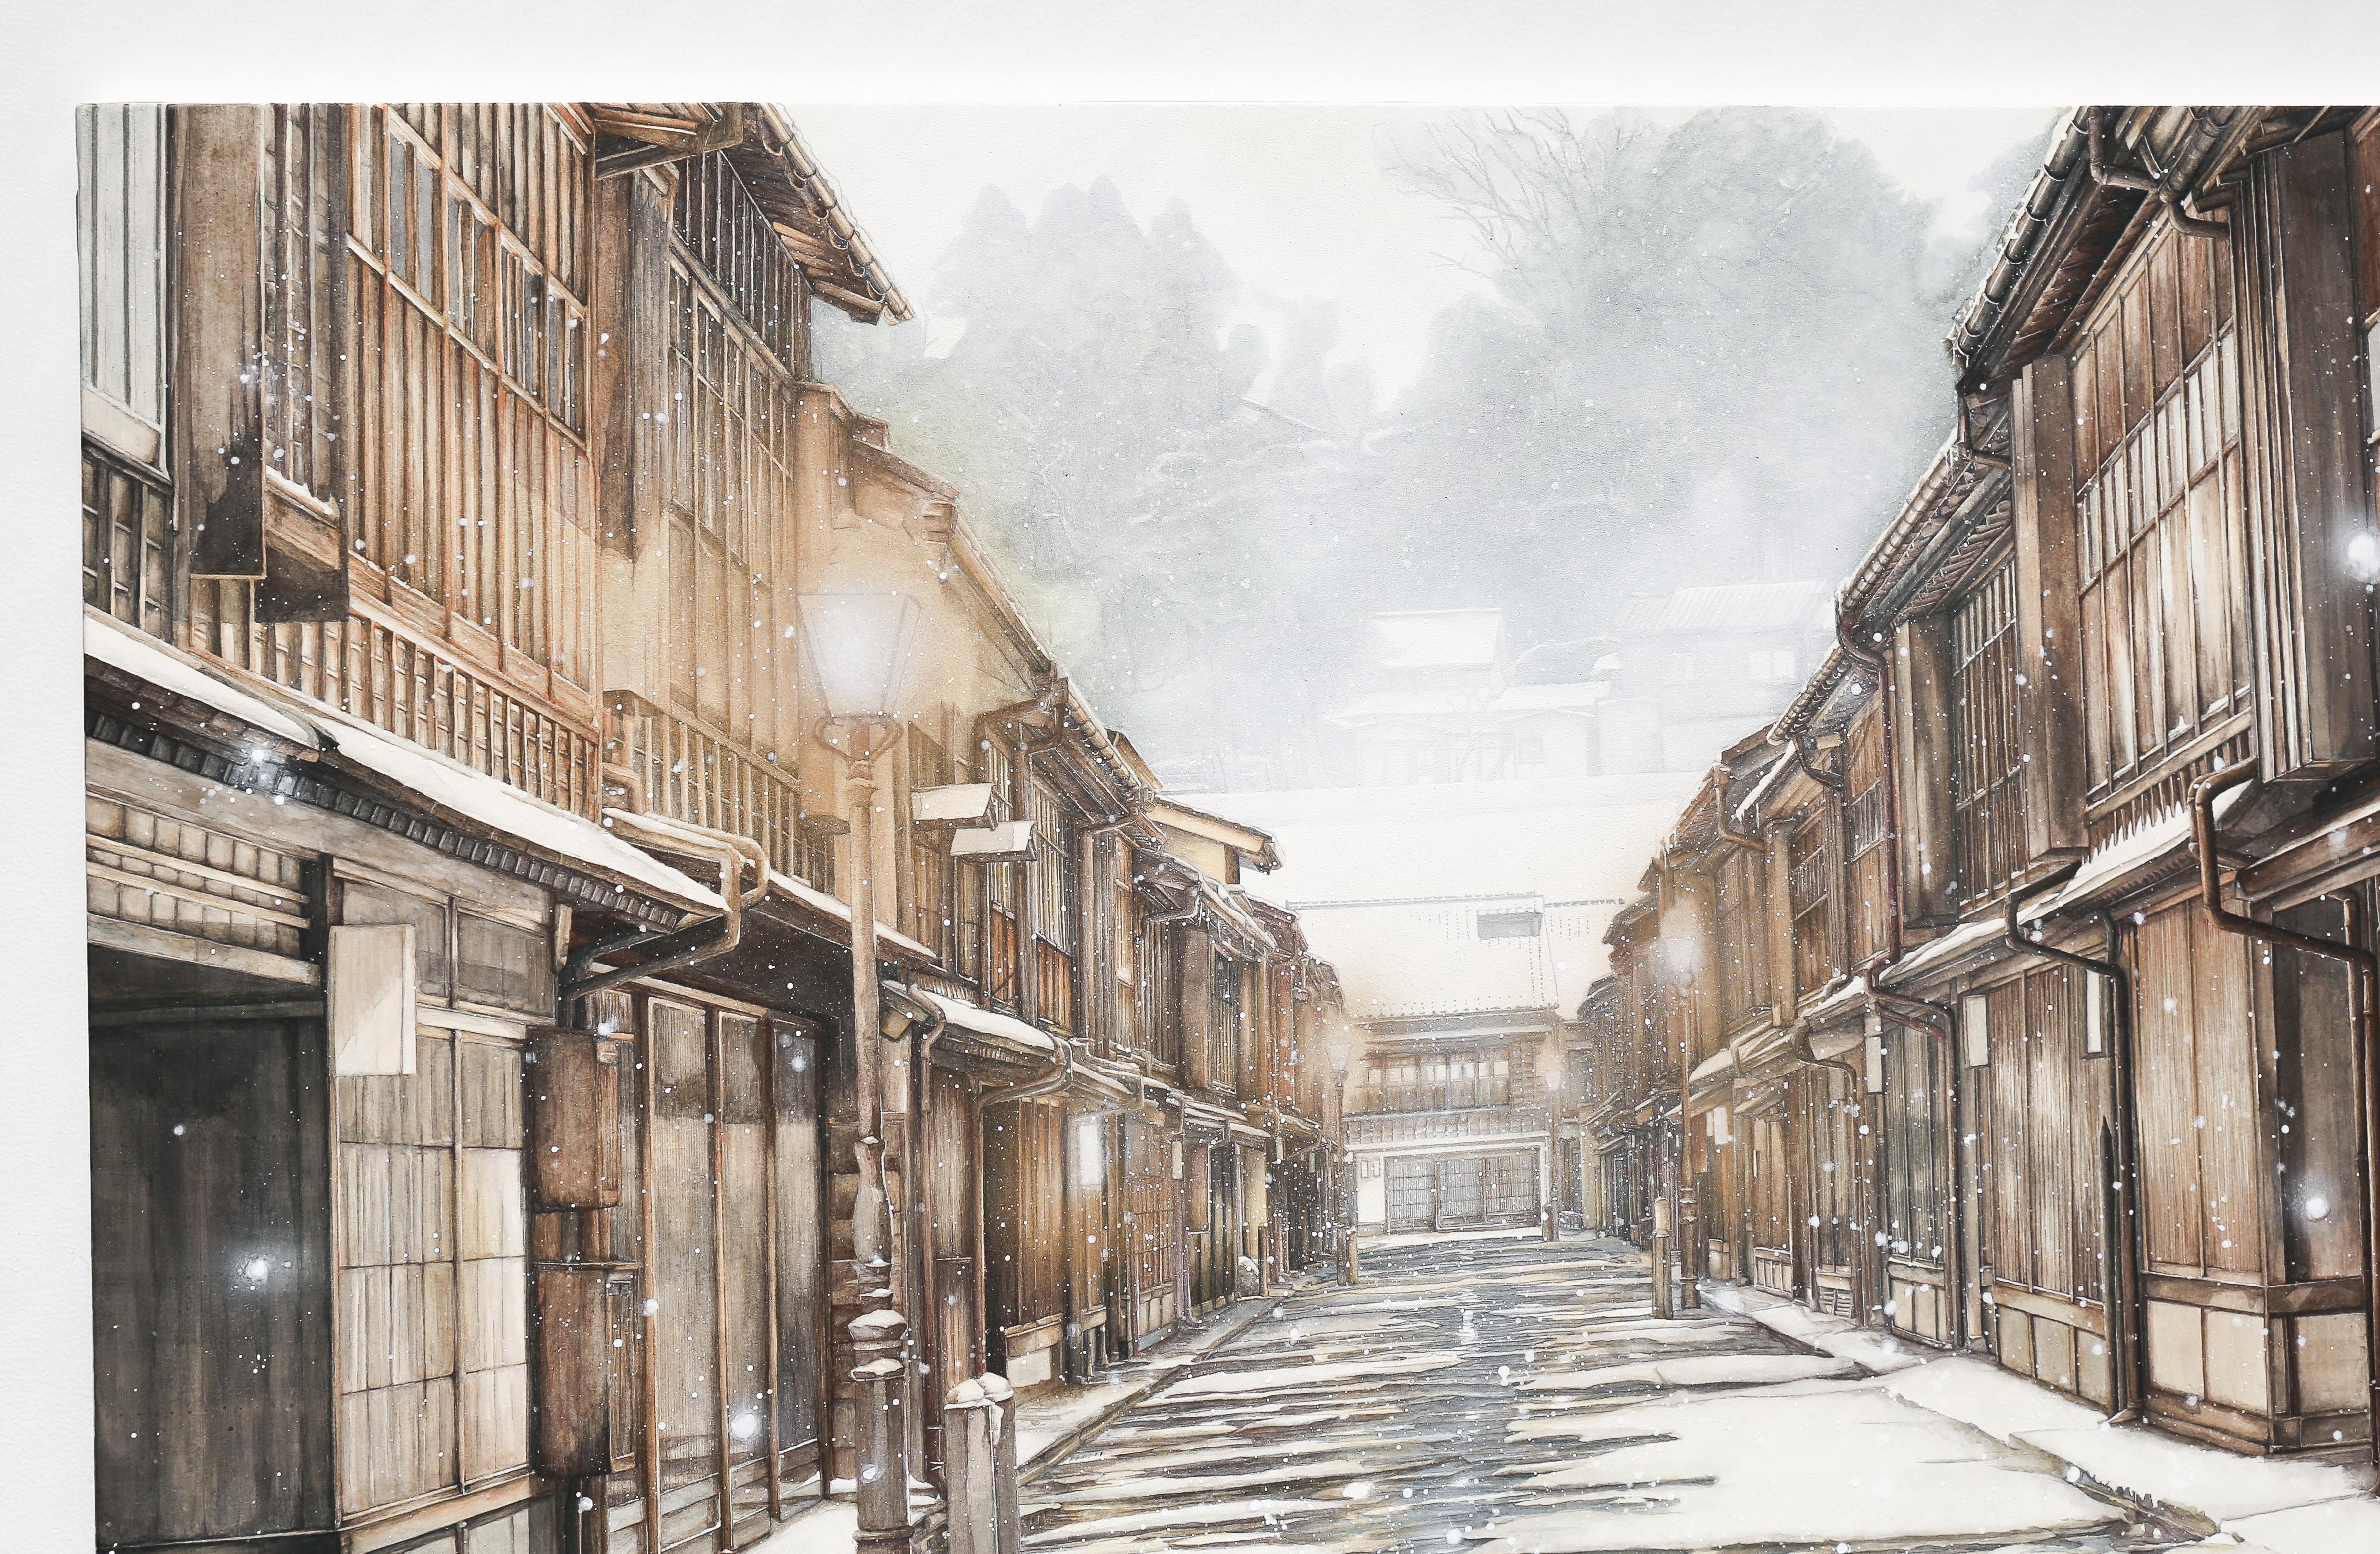 Kanazawa - Japanese Cityscape Painting in 24k Gold and Minerals, Realism, Winter For Sale 4